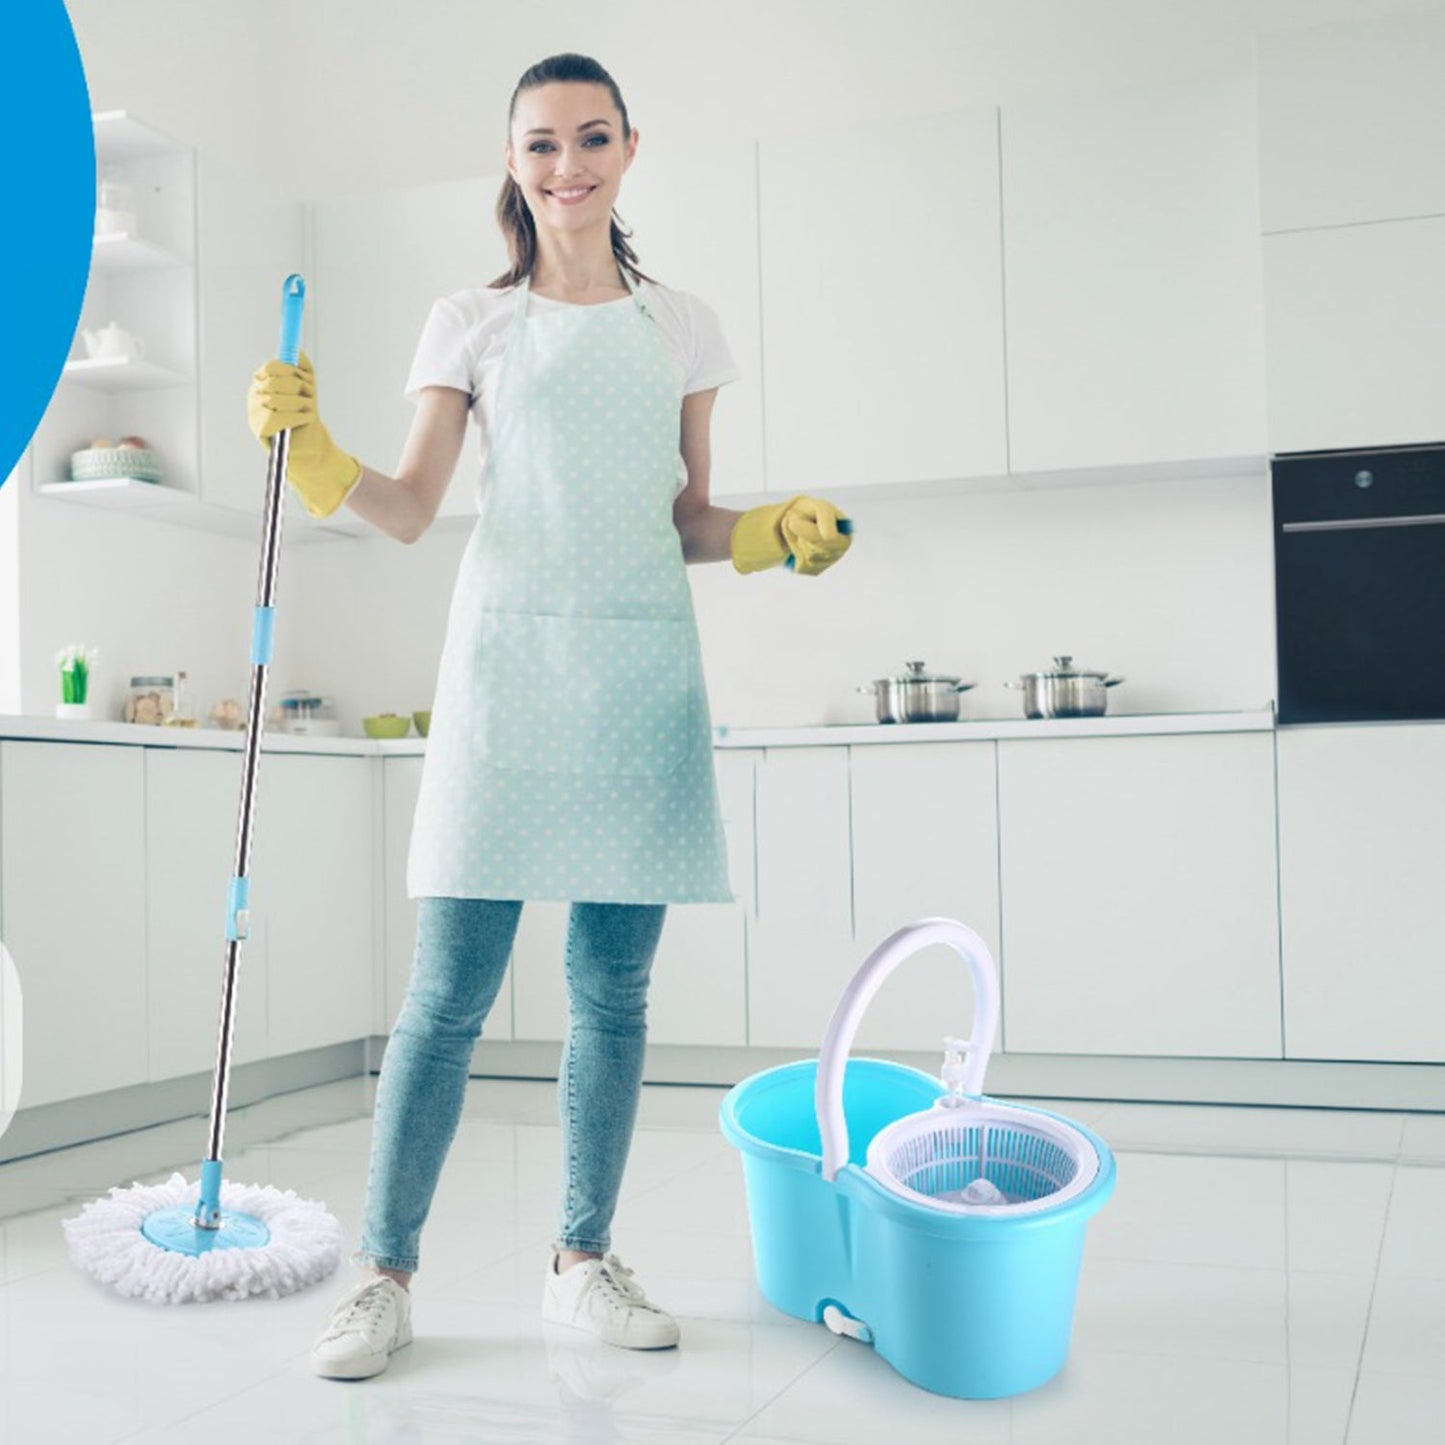 8702 Plastic Spinner Bucket Mop 360 Degree Self Spin Wringing with 2 Absorbers for Home and Office Floor Cleaning Mops Set